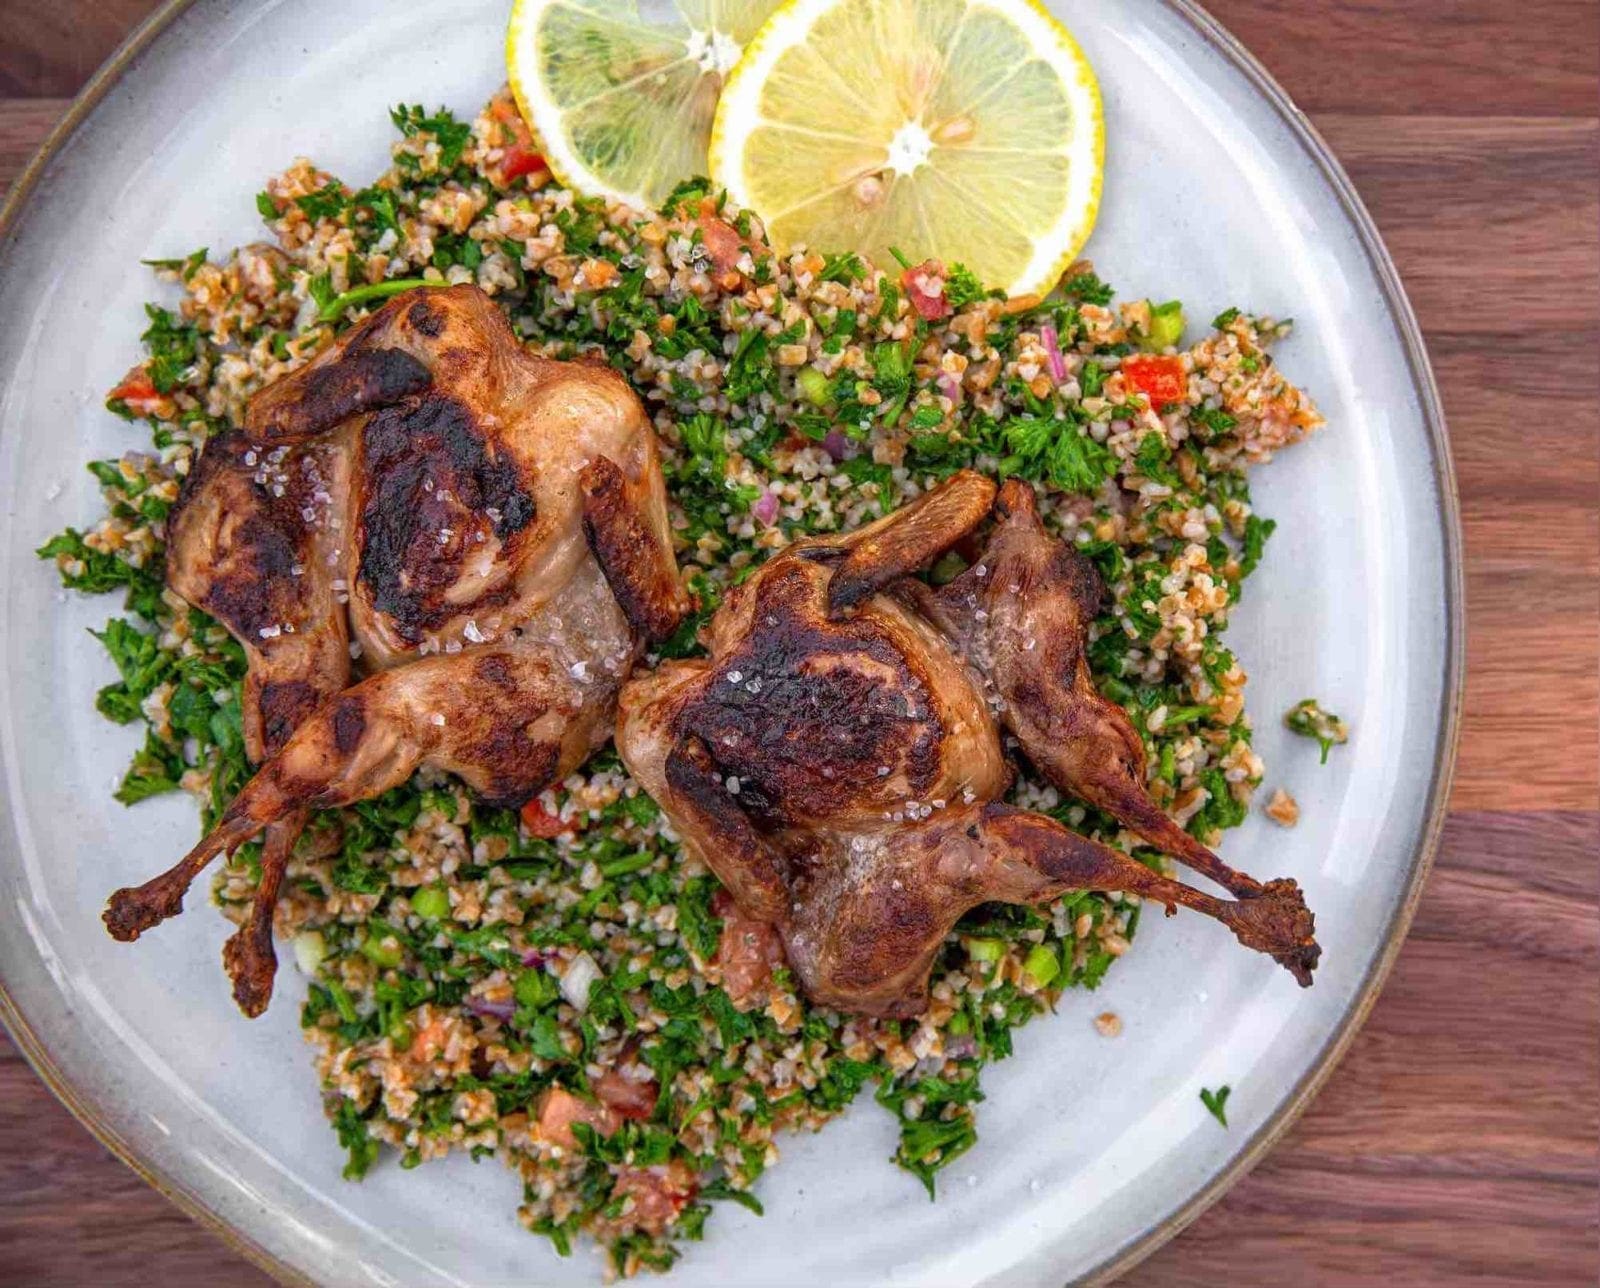 Grilled quail served atop a fresh tabbouleh salad